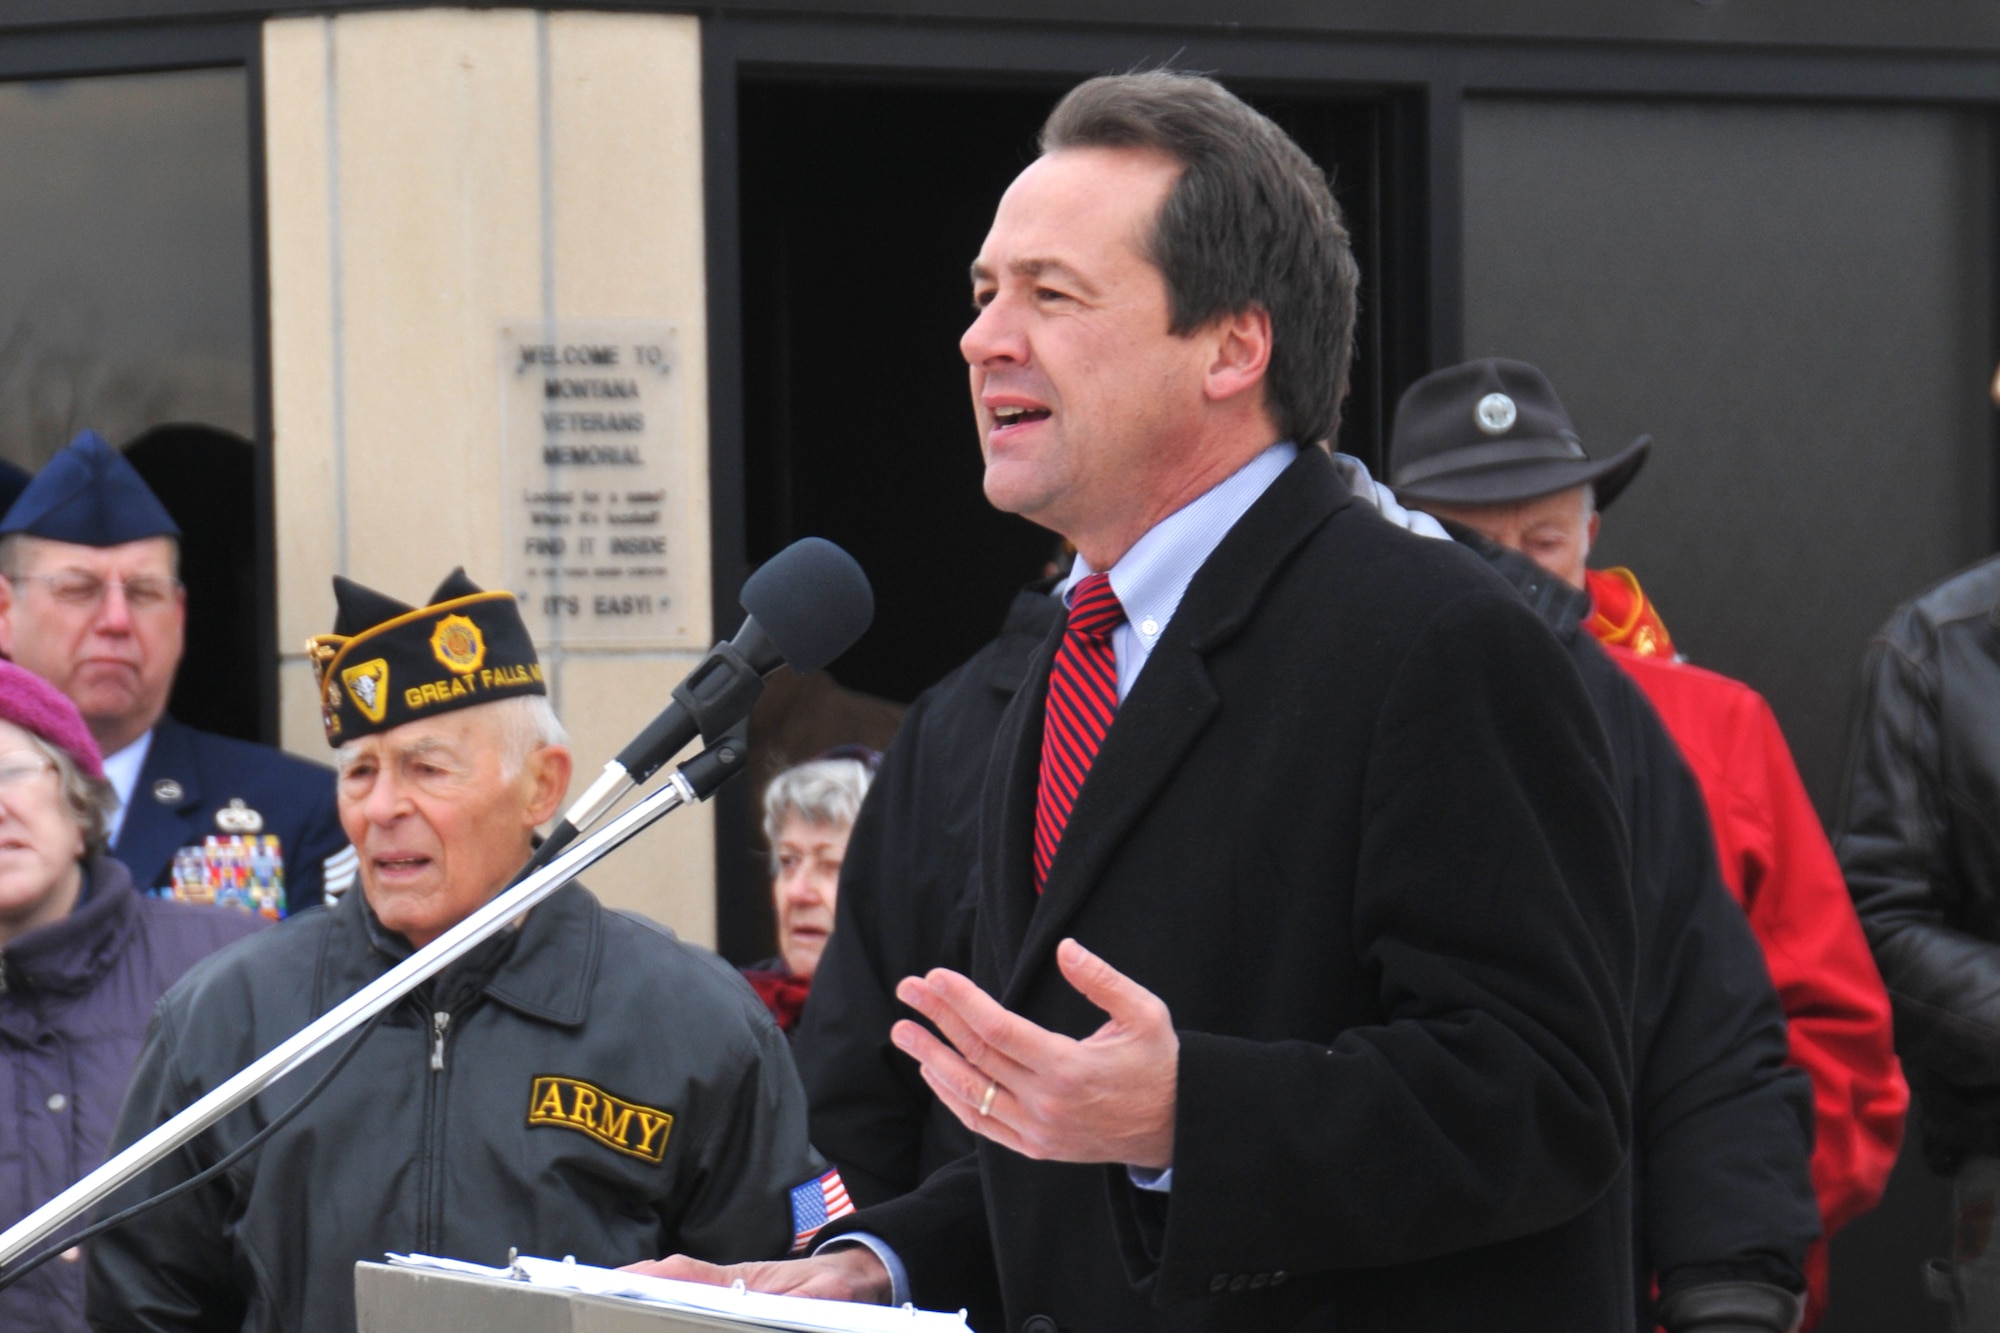 Montana Governor Steve Bullock speaks to the citizens gathered during the Veterans Day ceremony held at the Montana Veterans Memorial in Great Falls, Mont., Nov. 11, 2015. (U.S. Air National Guard photo by Senior Master Sgt. Eric Peterson/Released)

